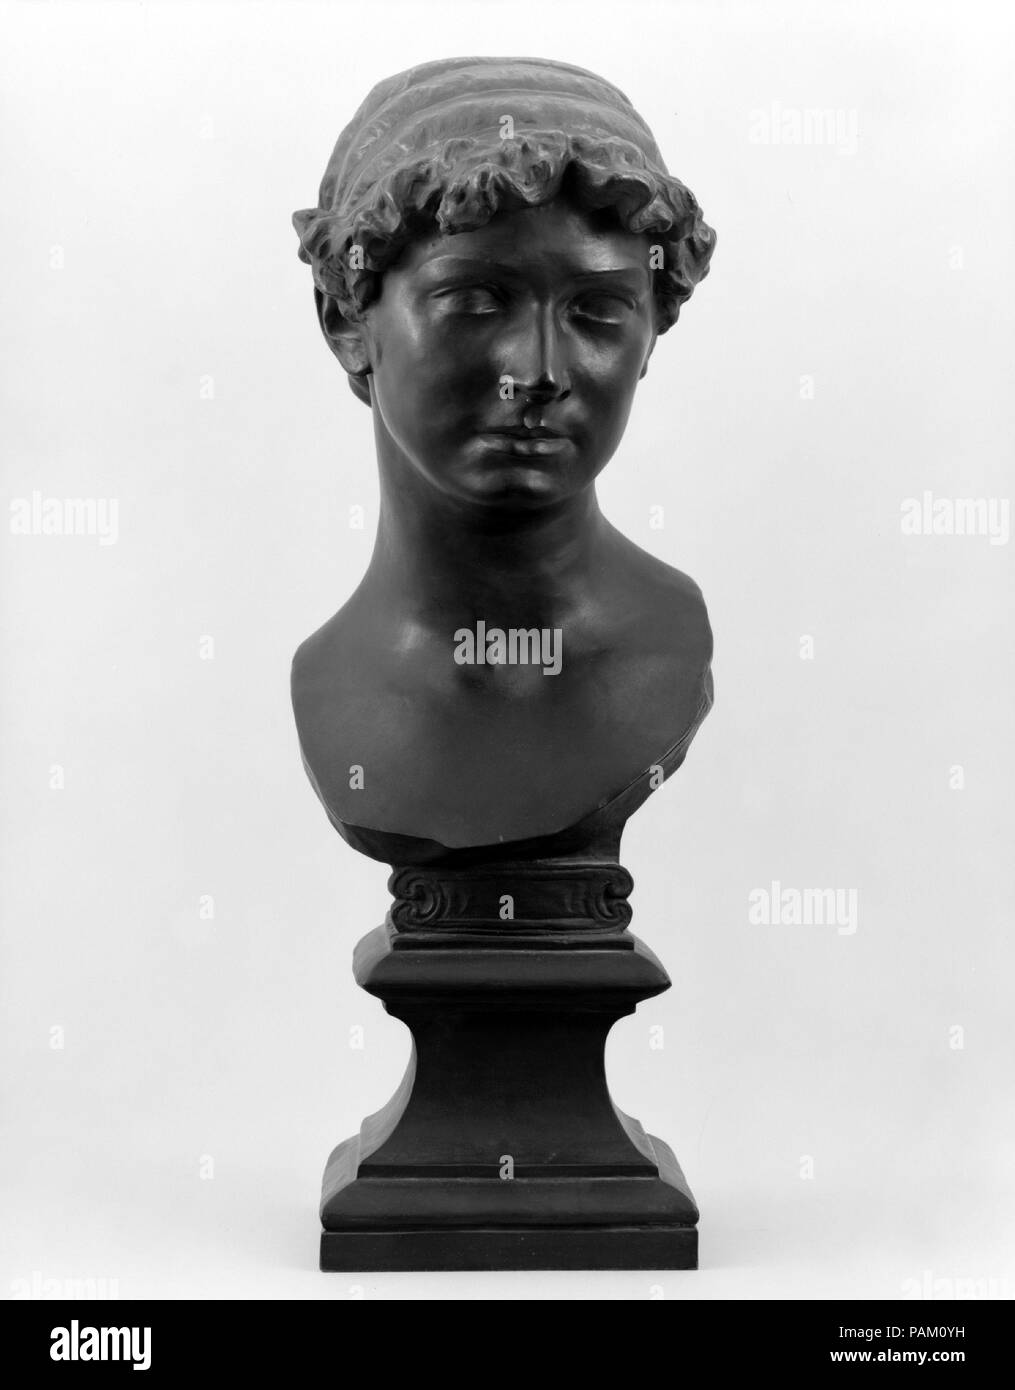 Maud Morgan. Artist: Olin Levi Warner (American, West Suffield, Connecticut 1844-1896 New York). Dimensions: 22 3/4 x 7 1/4 x 10 in. (57.8 x 18.4 x 25.4 cm). Date: 1880, cast 1897-98.  Warner may have been inspired to model a portrait of harpist Maud Morgan (1860-1941) after seeing her perform in New York. There is no evidence of a commission, so presumably the sculptor undertook the subject on his own initiative. His treatment of the bust integrated antique forms with the naturalistic features of Morgan's face. Morgan's filleted hair, blank eyes, and fragmented shoulder termination align the  Stock Photo